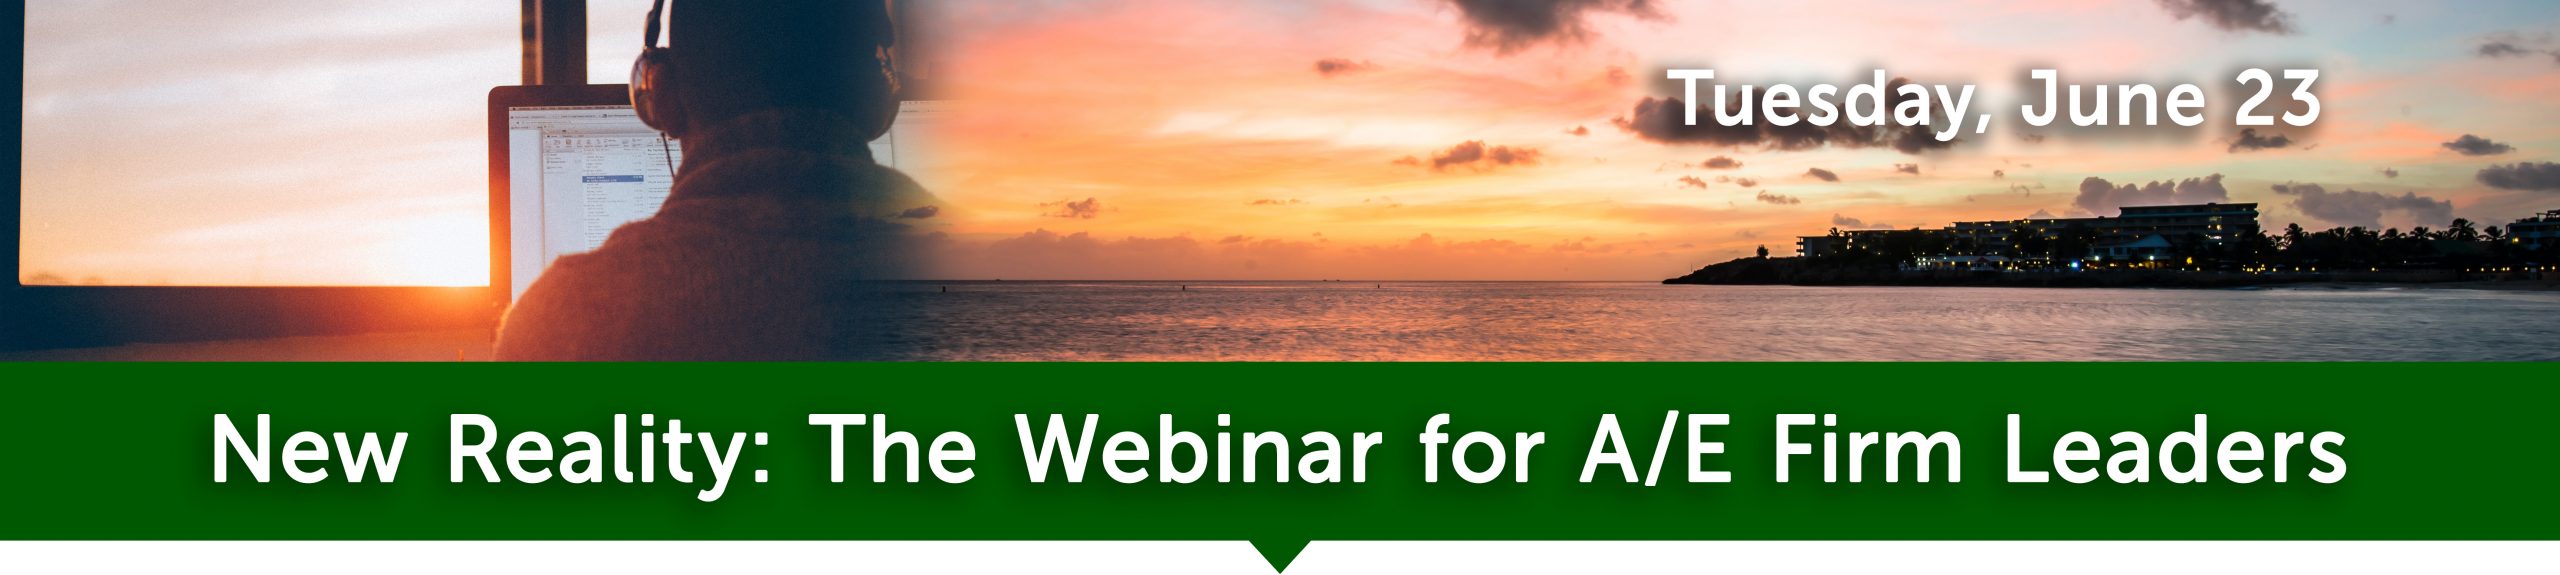 New Reality: The Webinar for A/E Firm Leaders